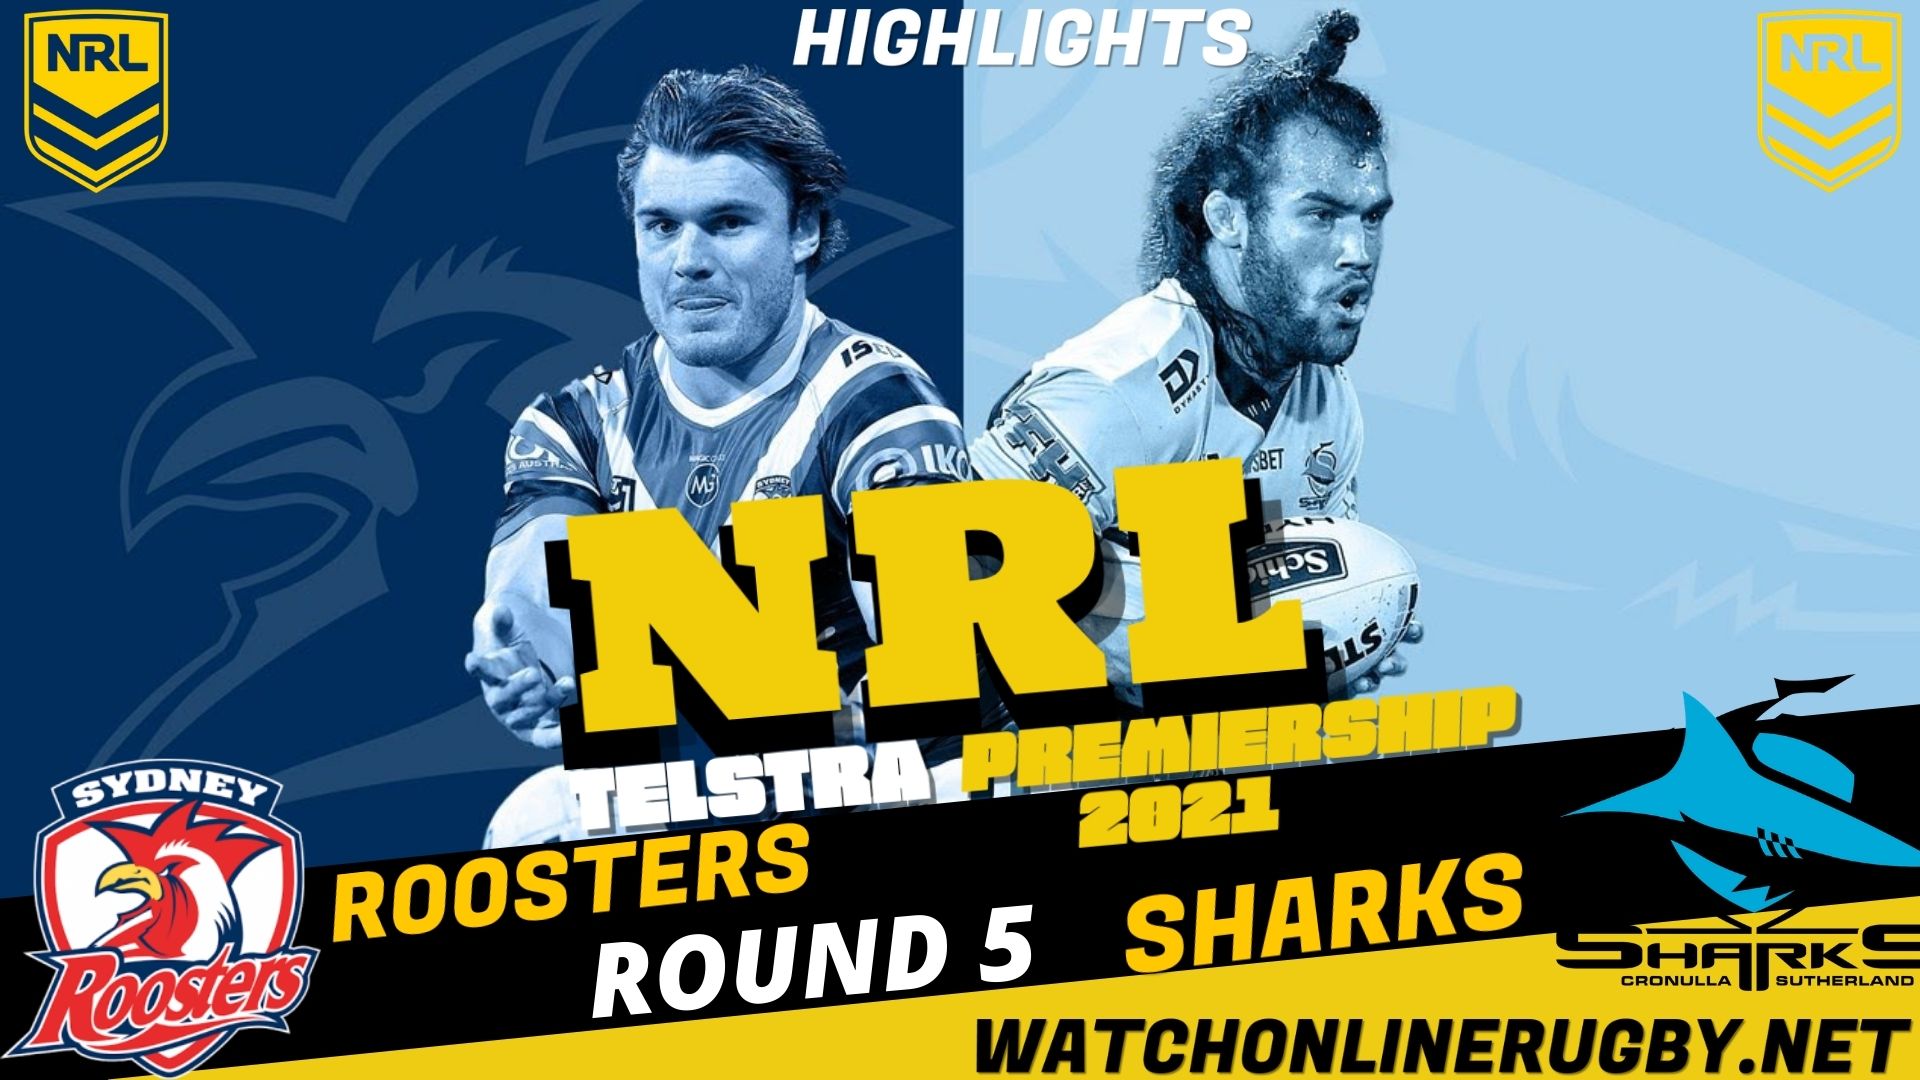 Roosters Vs Sharks Highlights RD 5 NRL Rugby